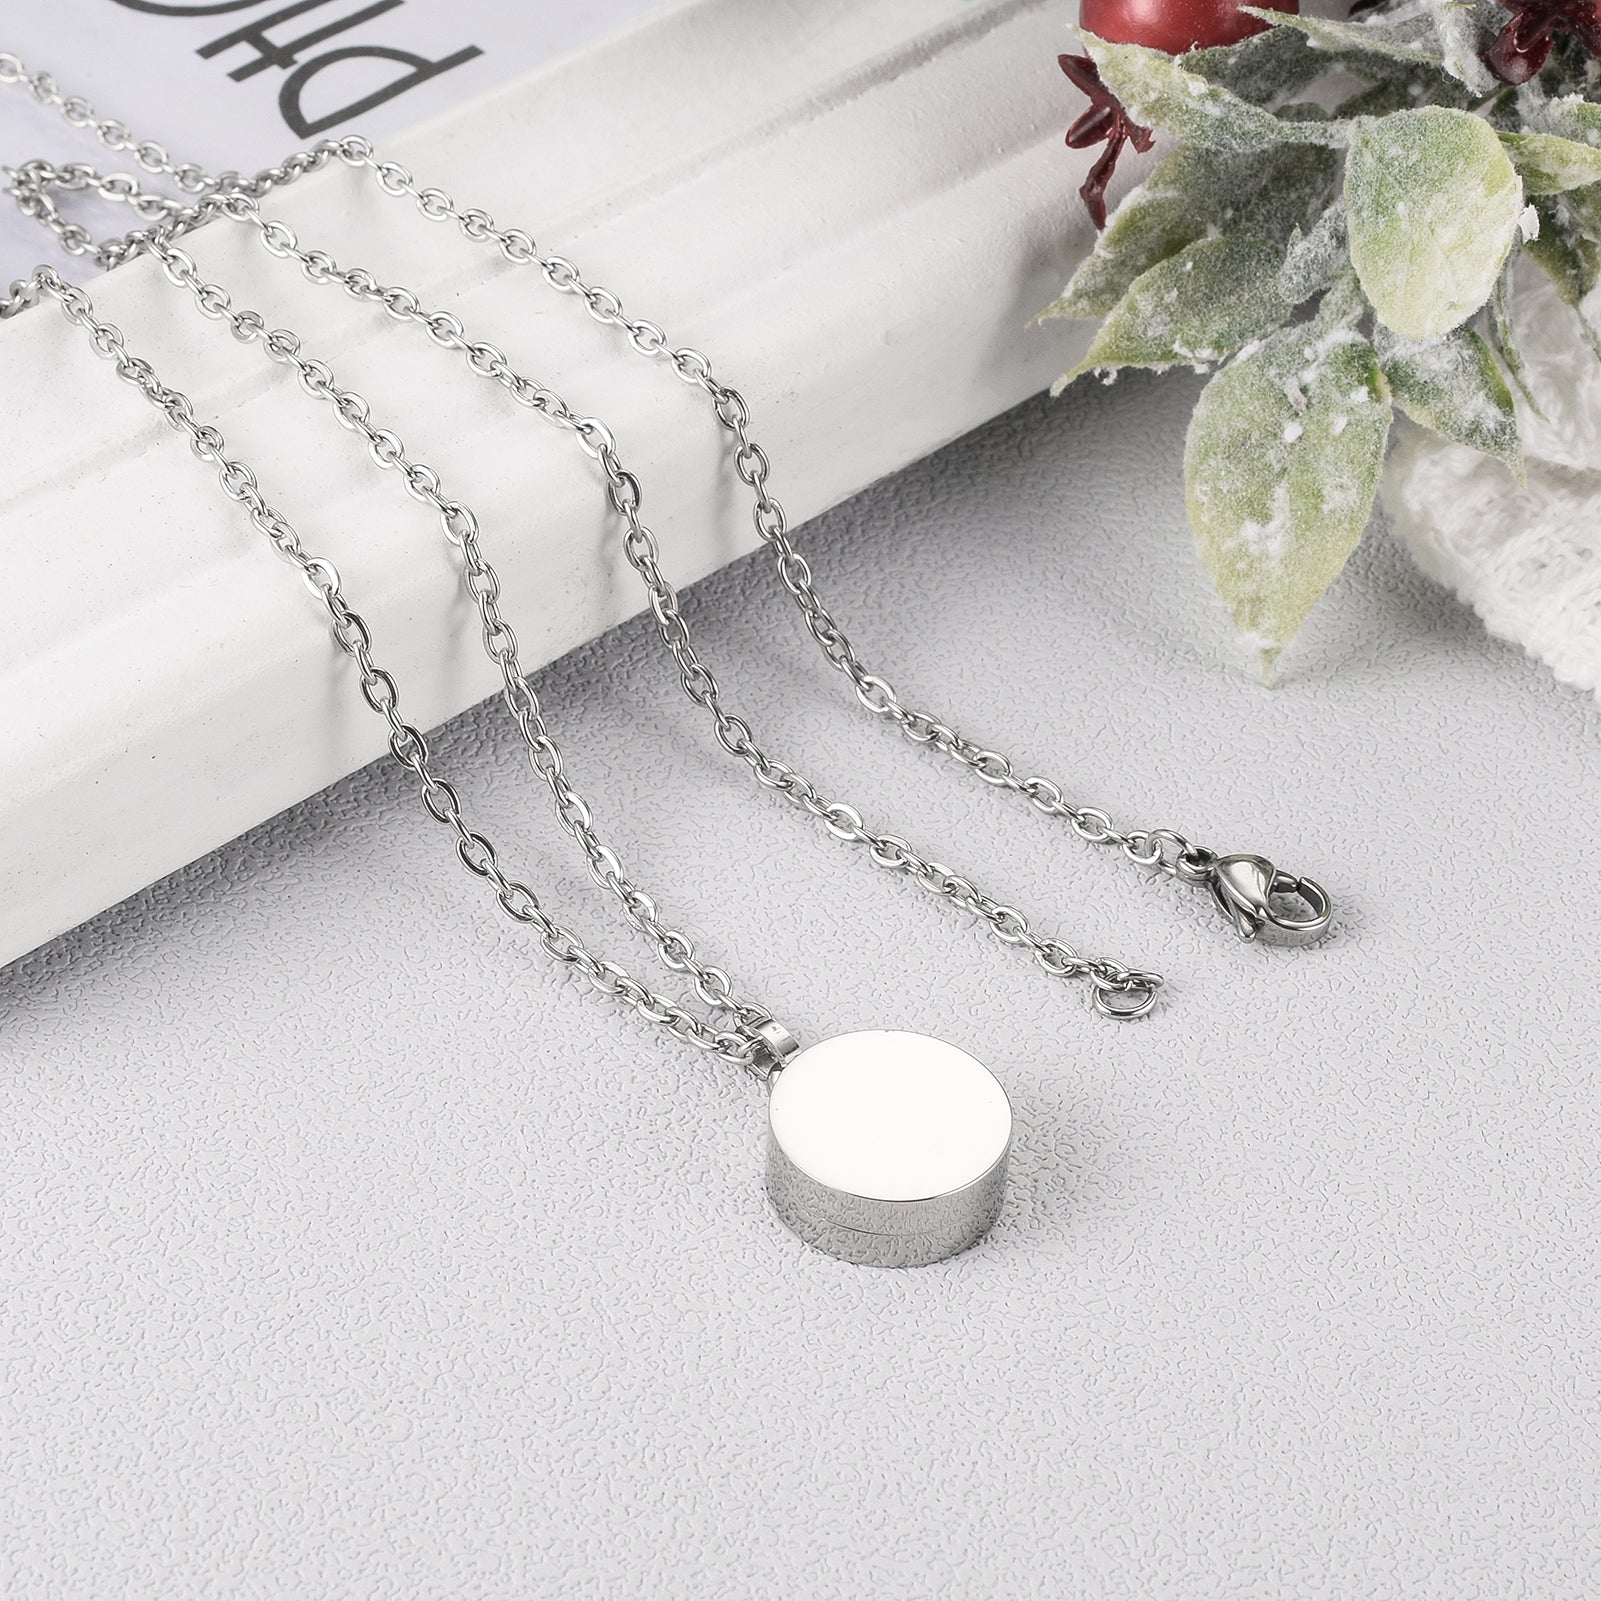 Handwriting Necklace Ashes Jewellery | Gemz By Emz